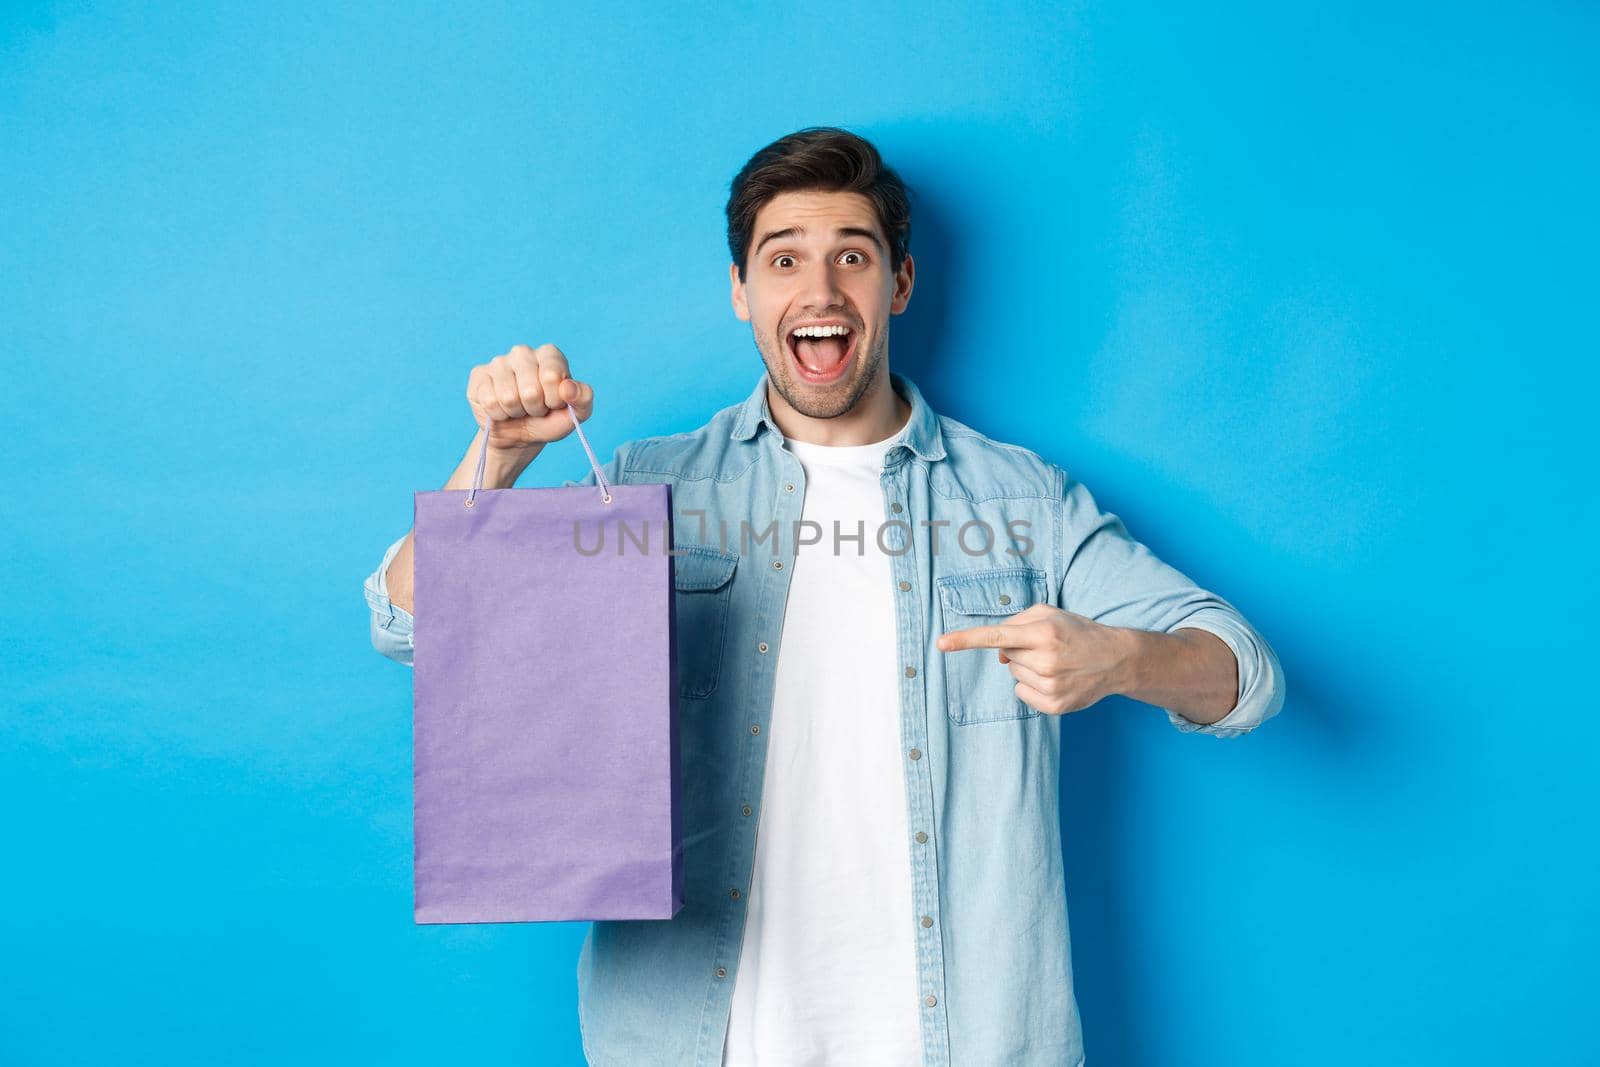 Concept of shopping, holidays and lifestyle. Excited guy pointing finger at paper bag and looking amazed, recommending store, announcing discounts, blue background.